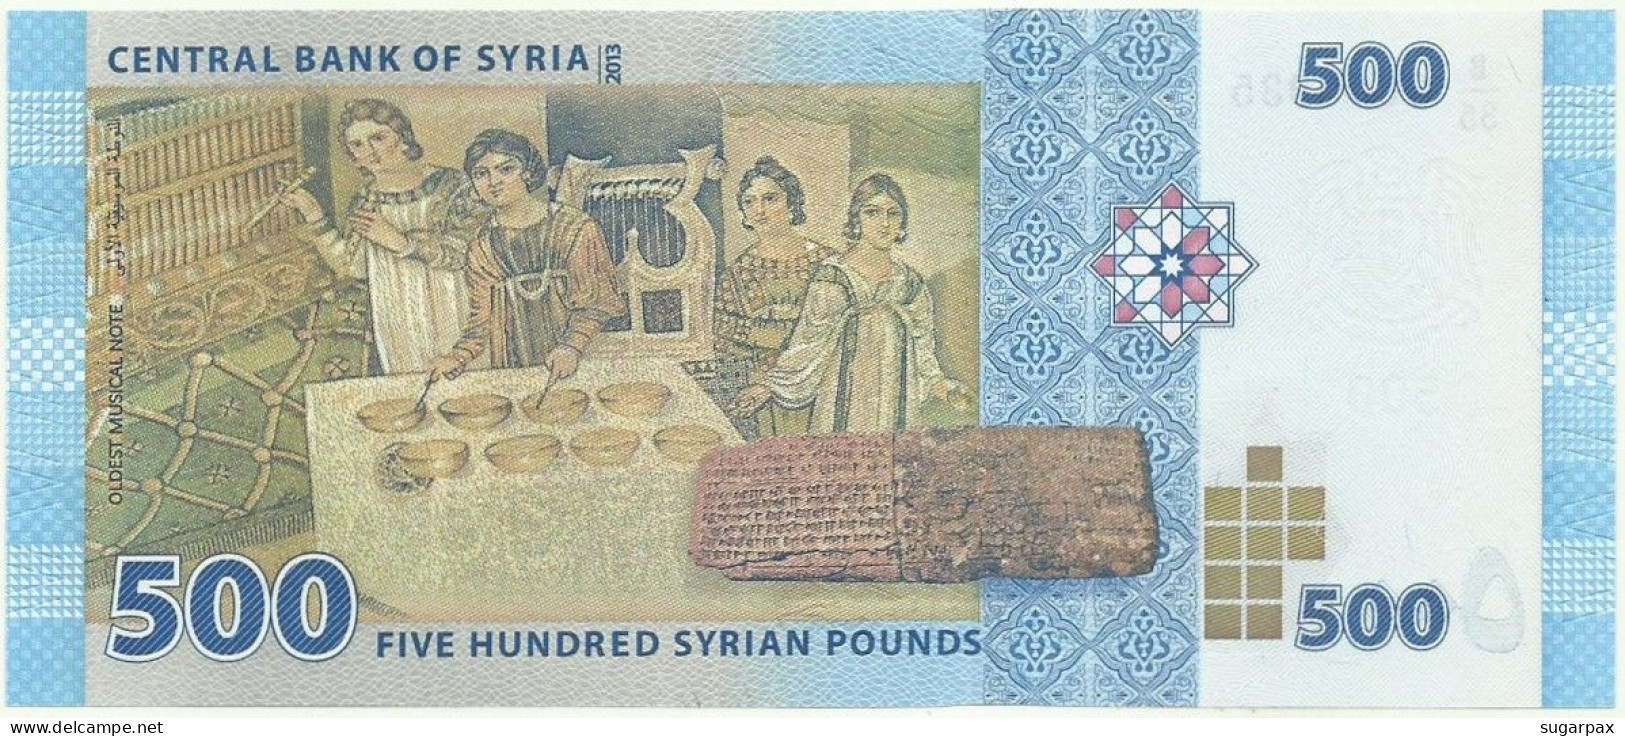 Syria - 500 Syrian Pounds - 2013 / AH 1434 - Pick 115 - Unc. - Serie B/35 - Syrien